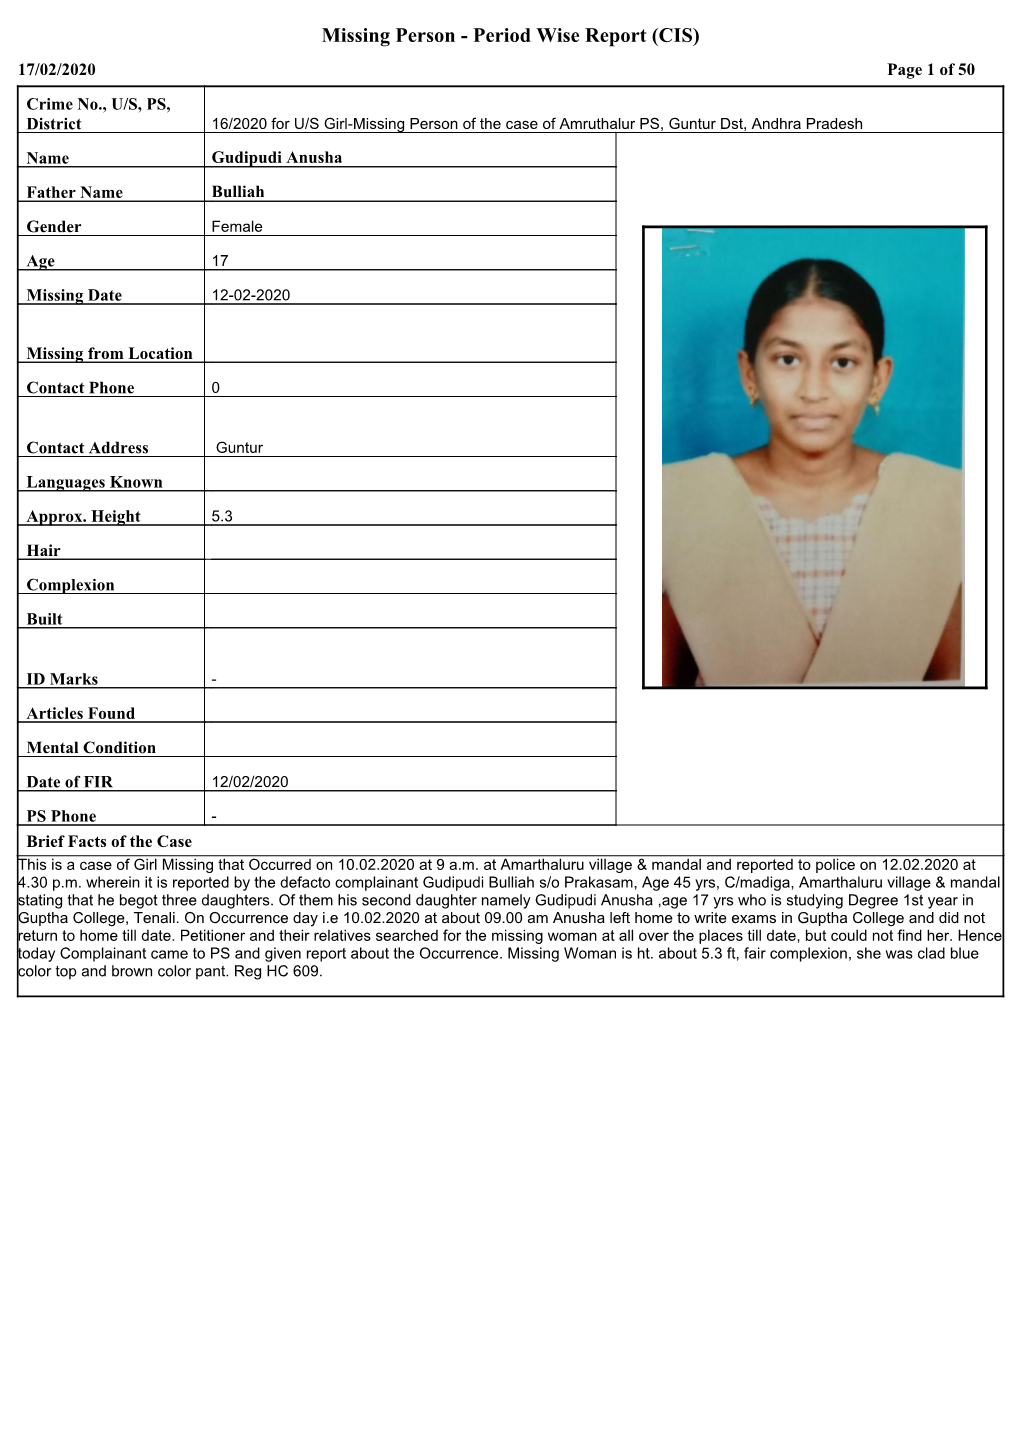 Missing Person - Period Wise Report (CIS) 17/02/2020 Page 1 of 50